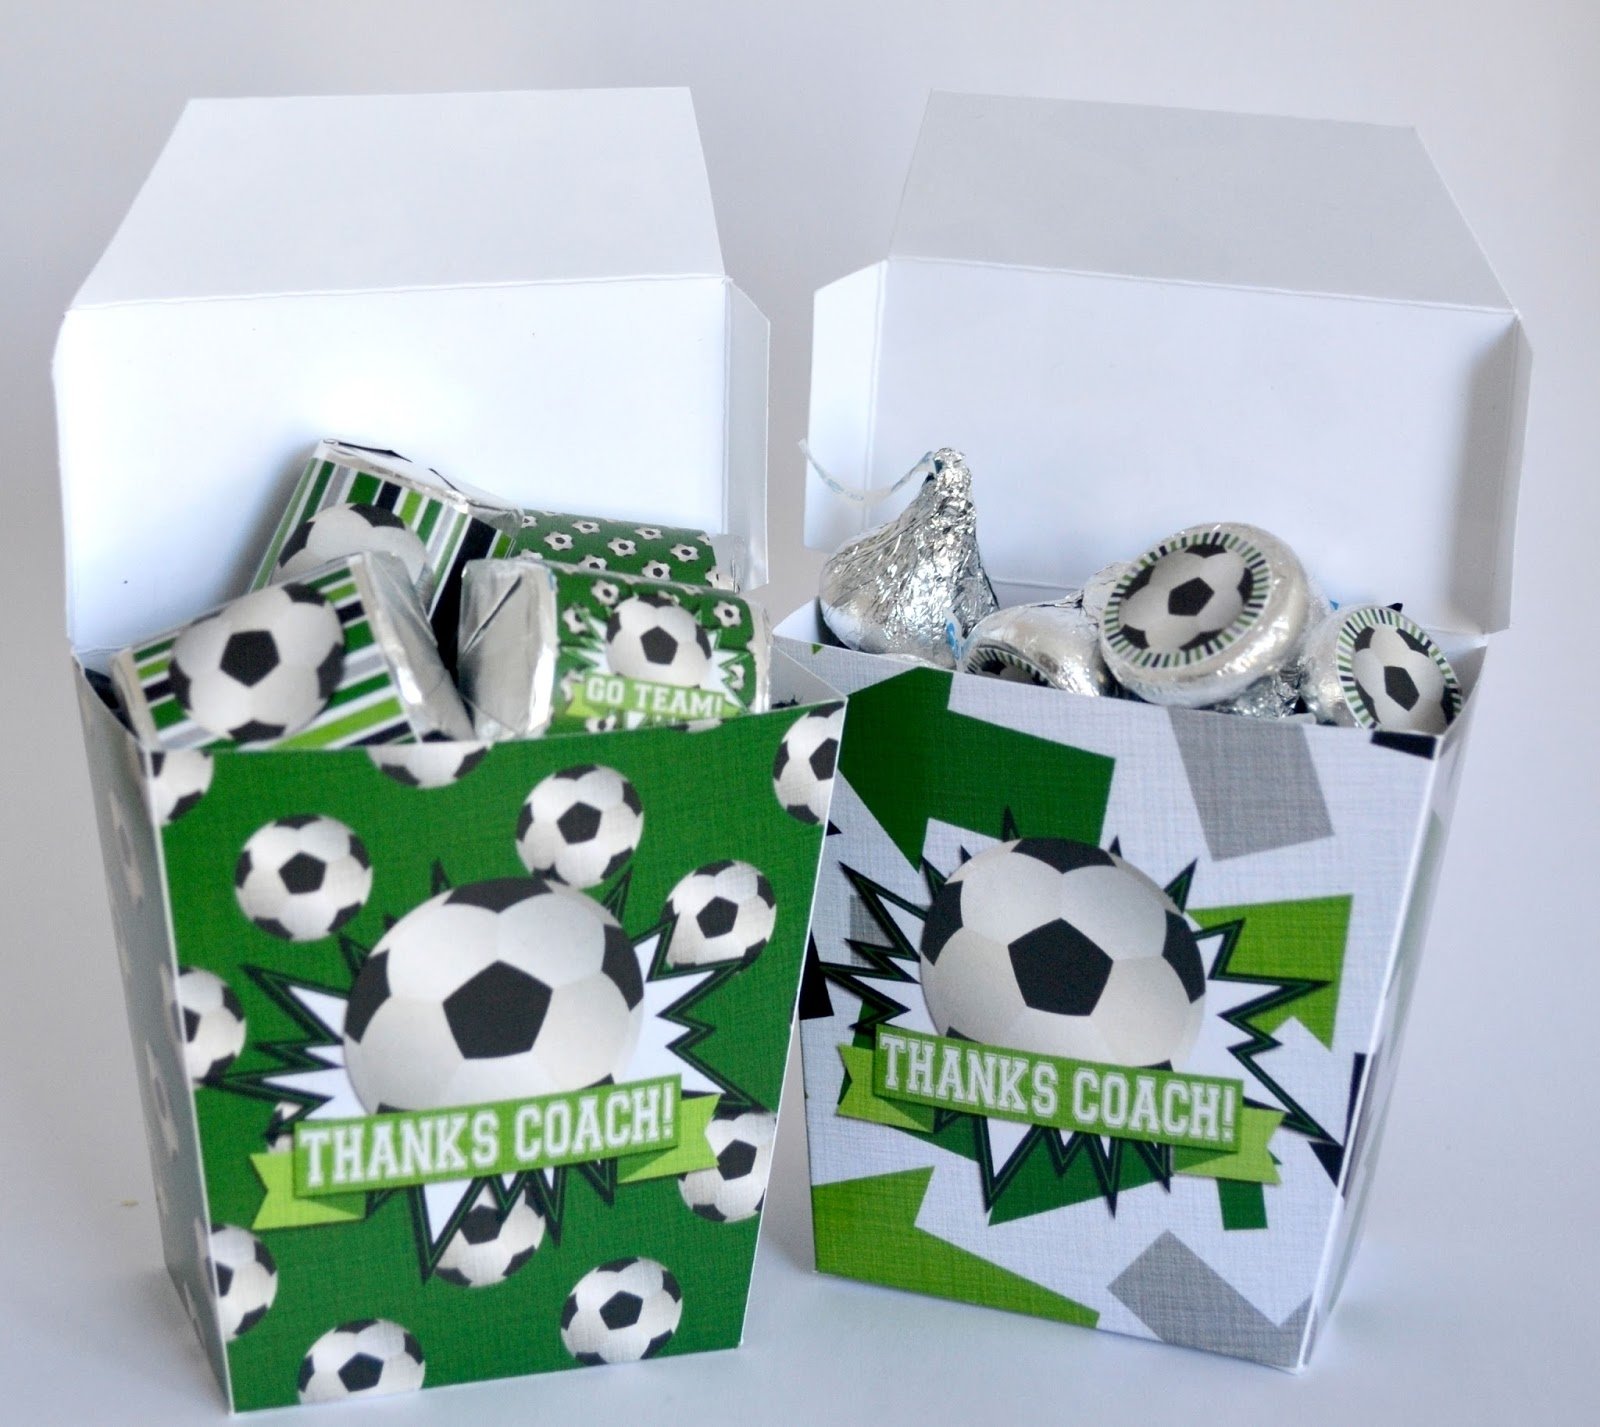 10 Ideal Gift Ideas For Soccer Coach coaches gifts soccer gift ideas 2022